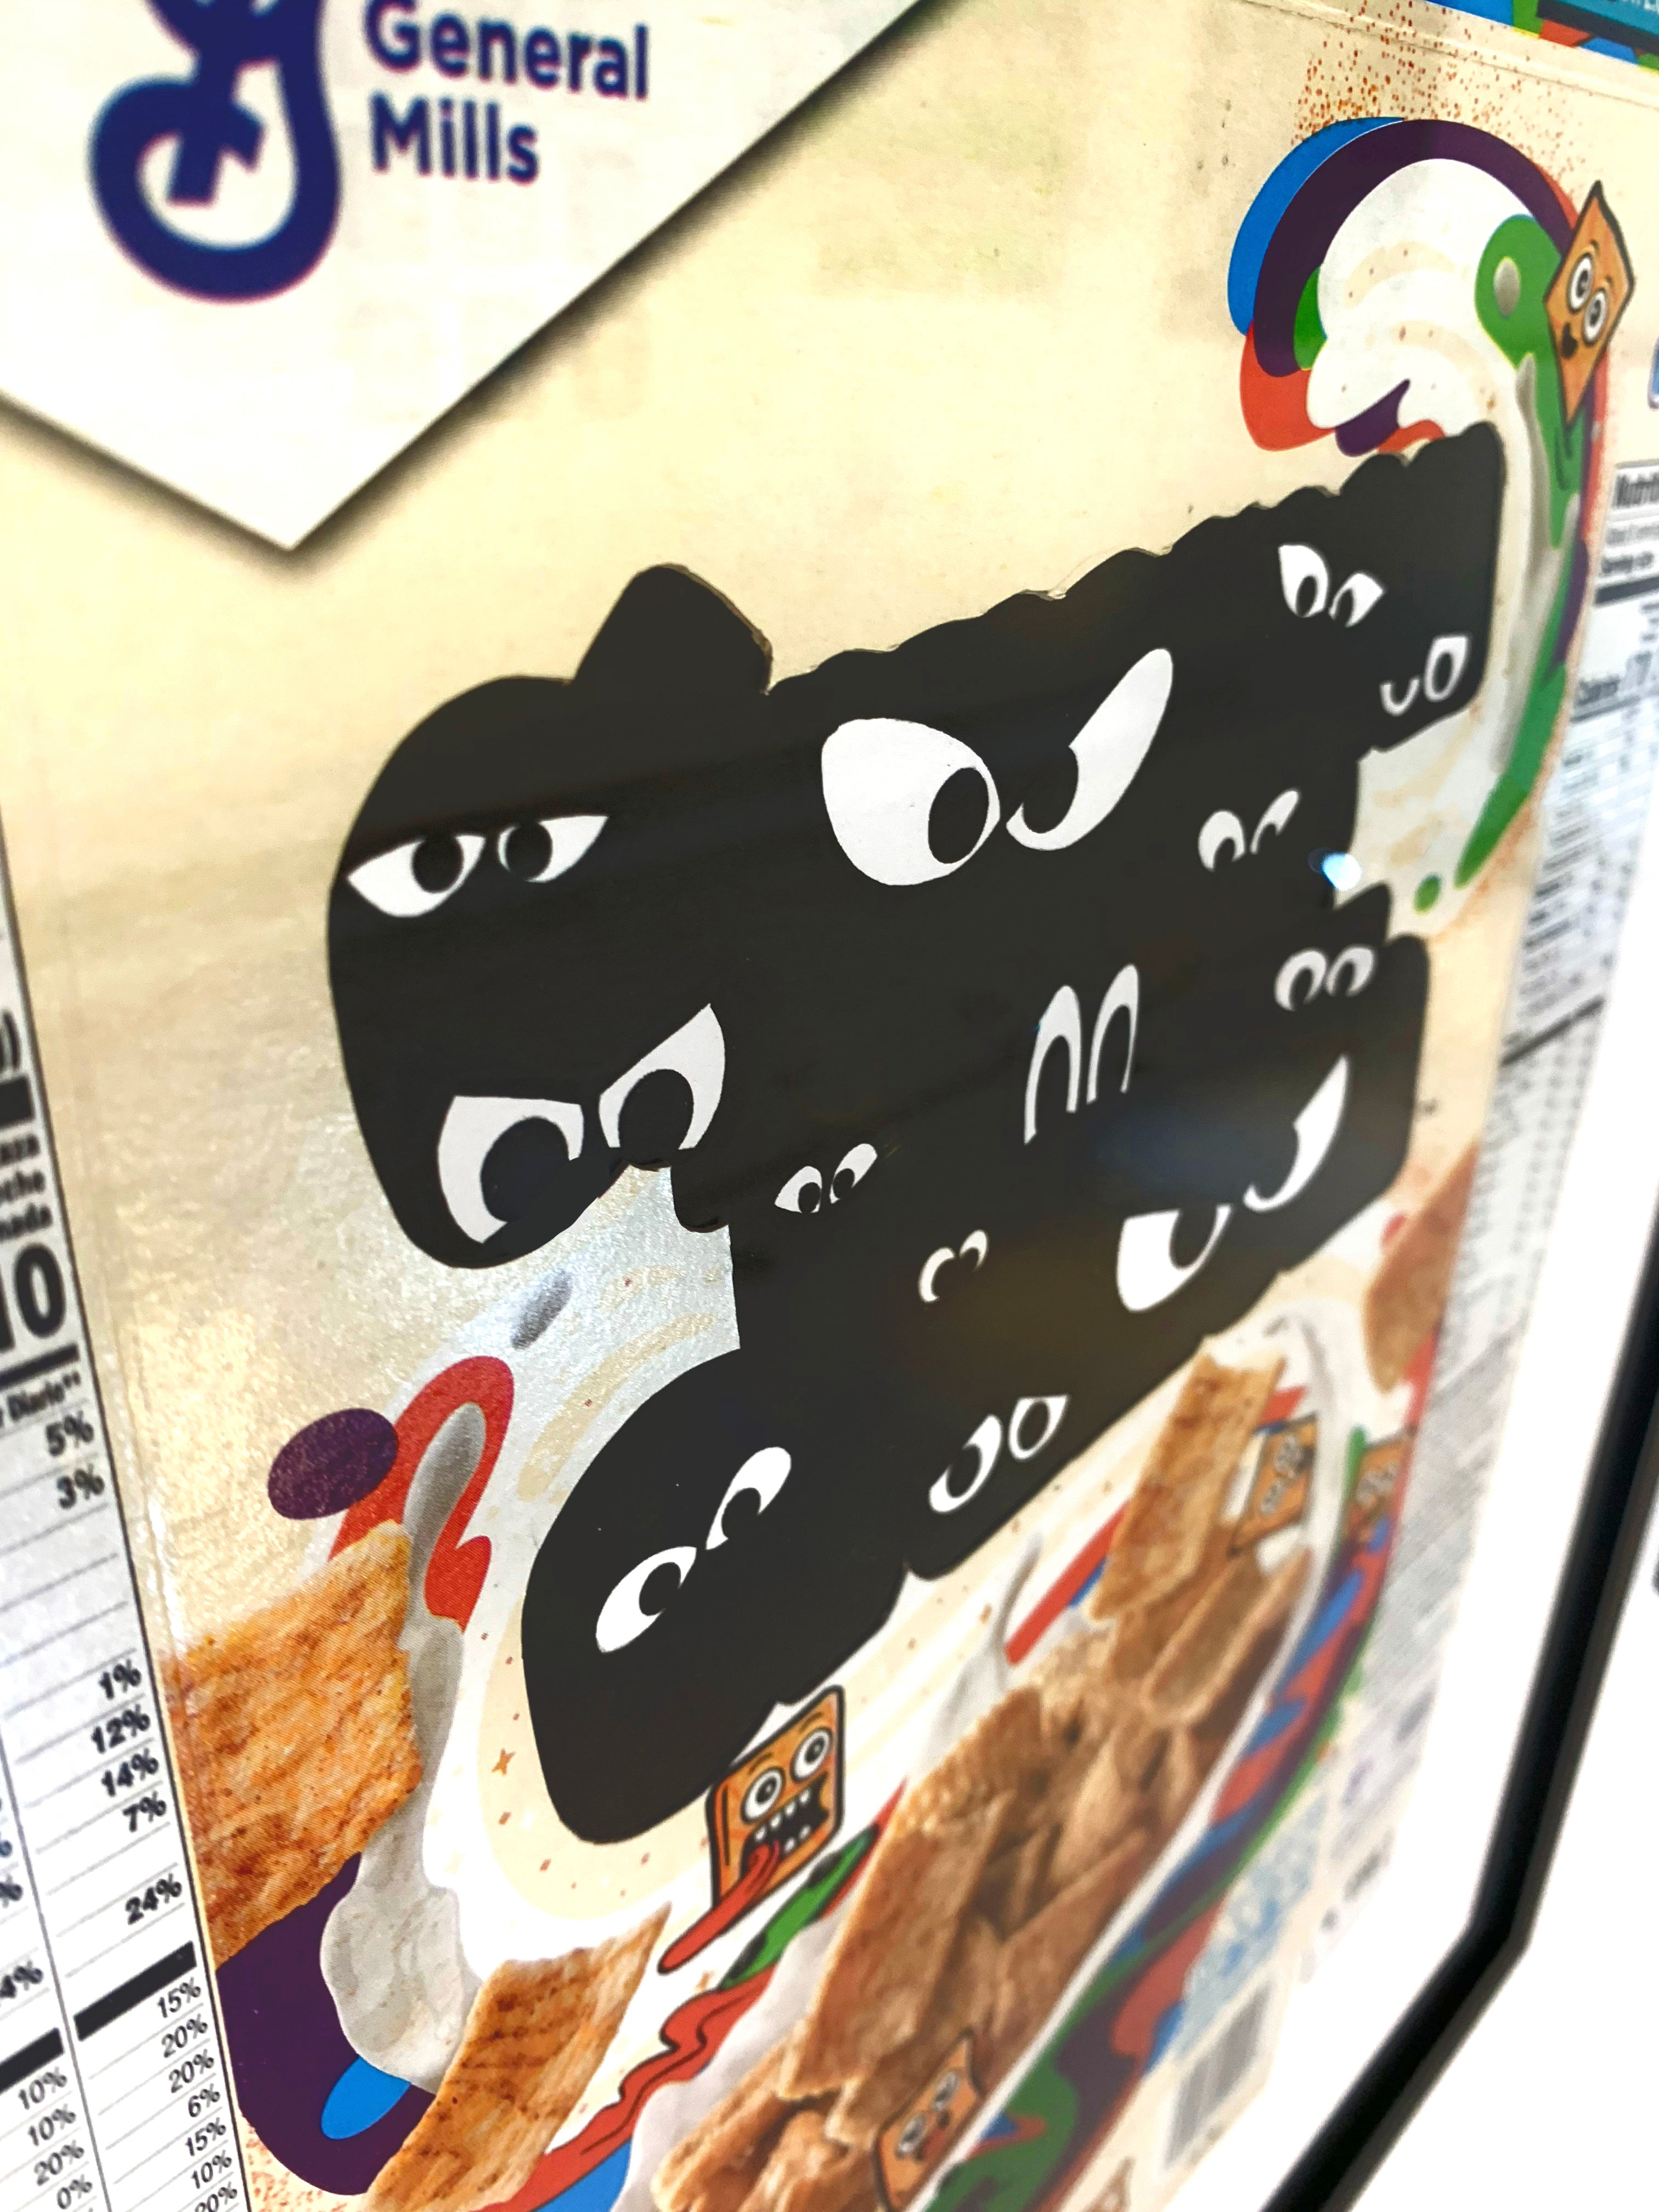 "Don't Eat My Cereal, I'm Watching You" by Griffin Goodman